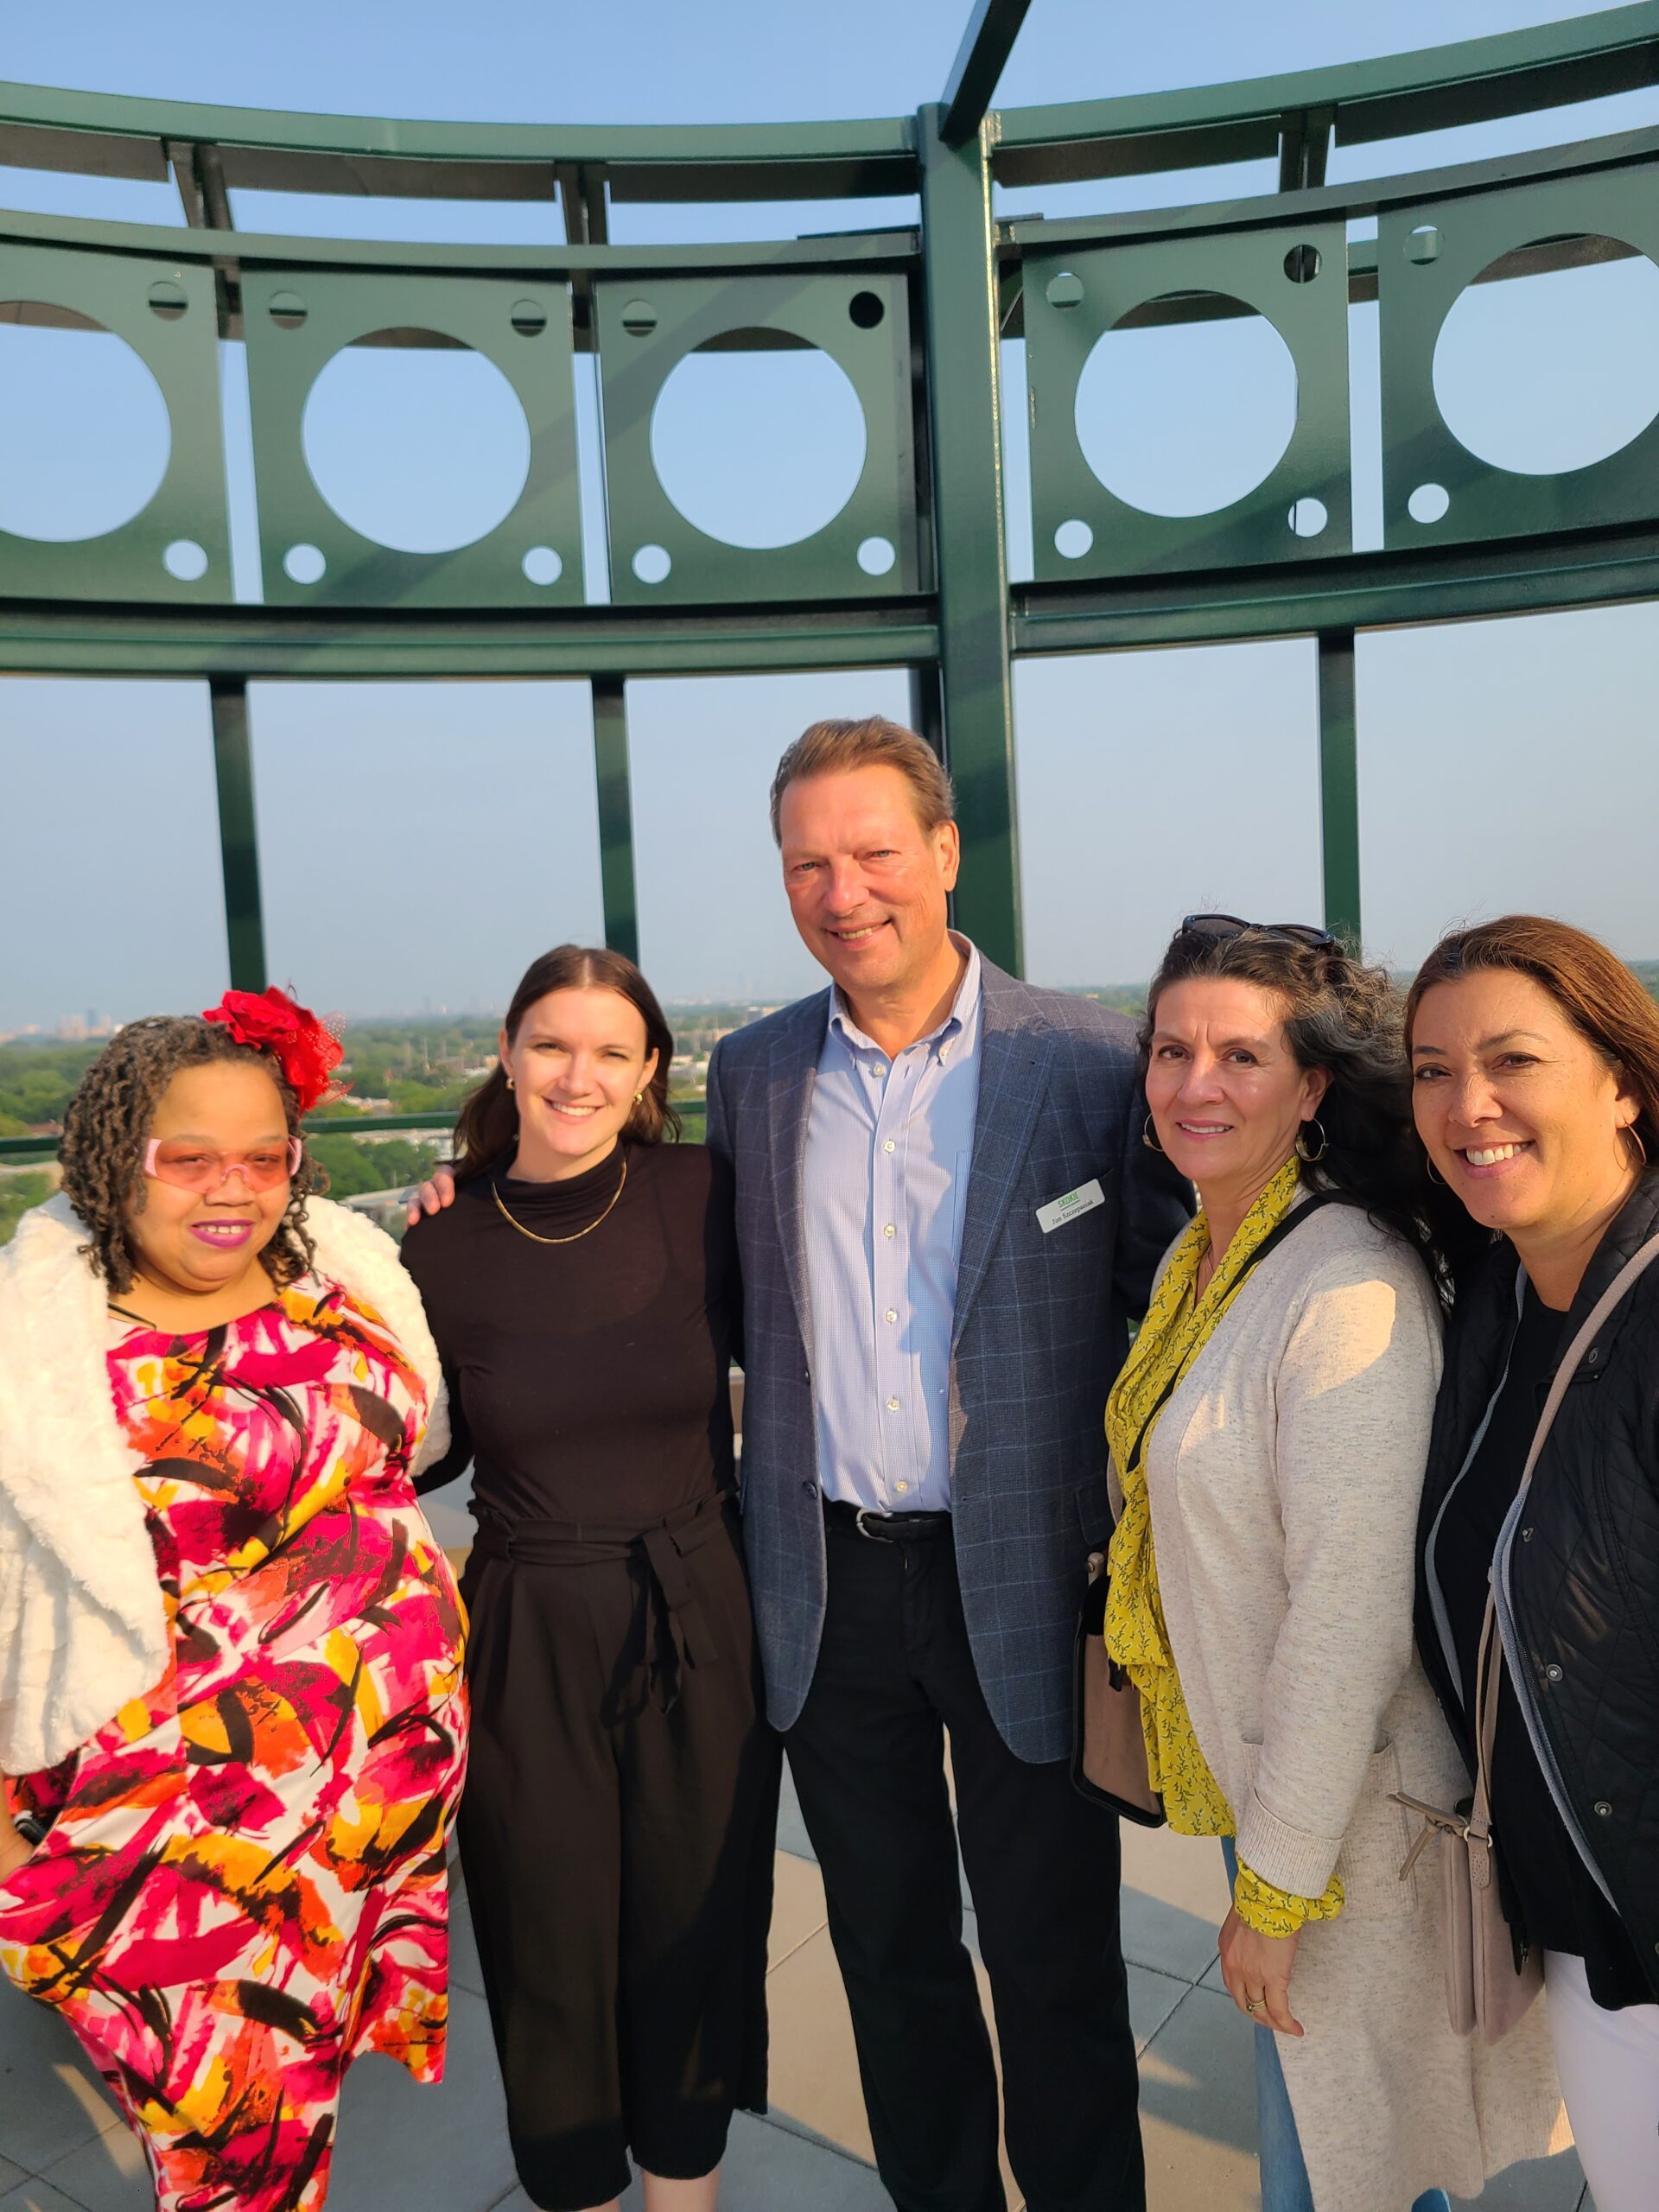 Pictured here (L to R) are Abigail Stone (Board of Directors Member, Connections for the Homeless), Kelsey Caspersen (Director of Government Relations, Connections for the Homeless), Jim Szczepaniak (Executive Director, SCF), Astrid Suarez (Director of Collective Impact, Early Childhood Alliance), and Tina Vanderwarker (Director, Early Childhood Alliance).